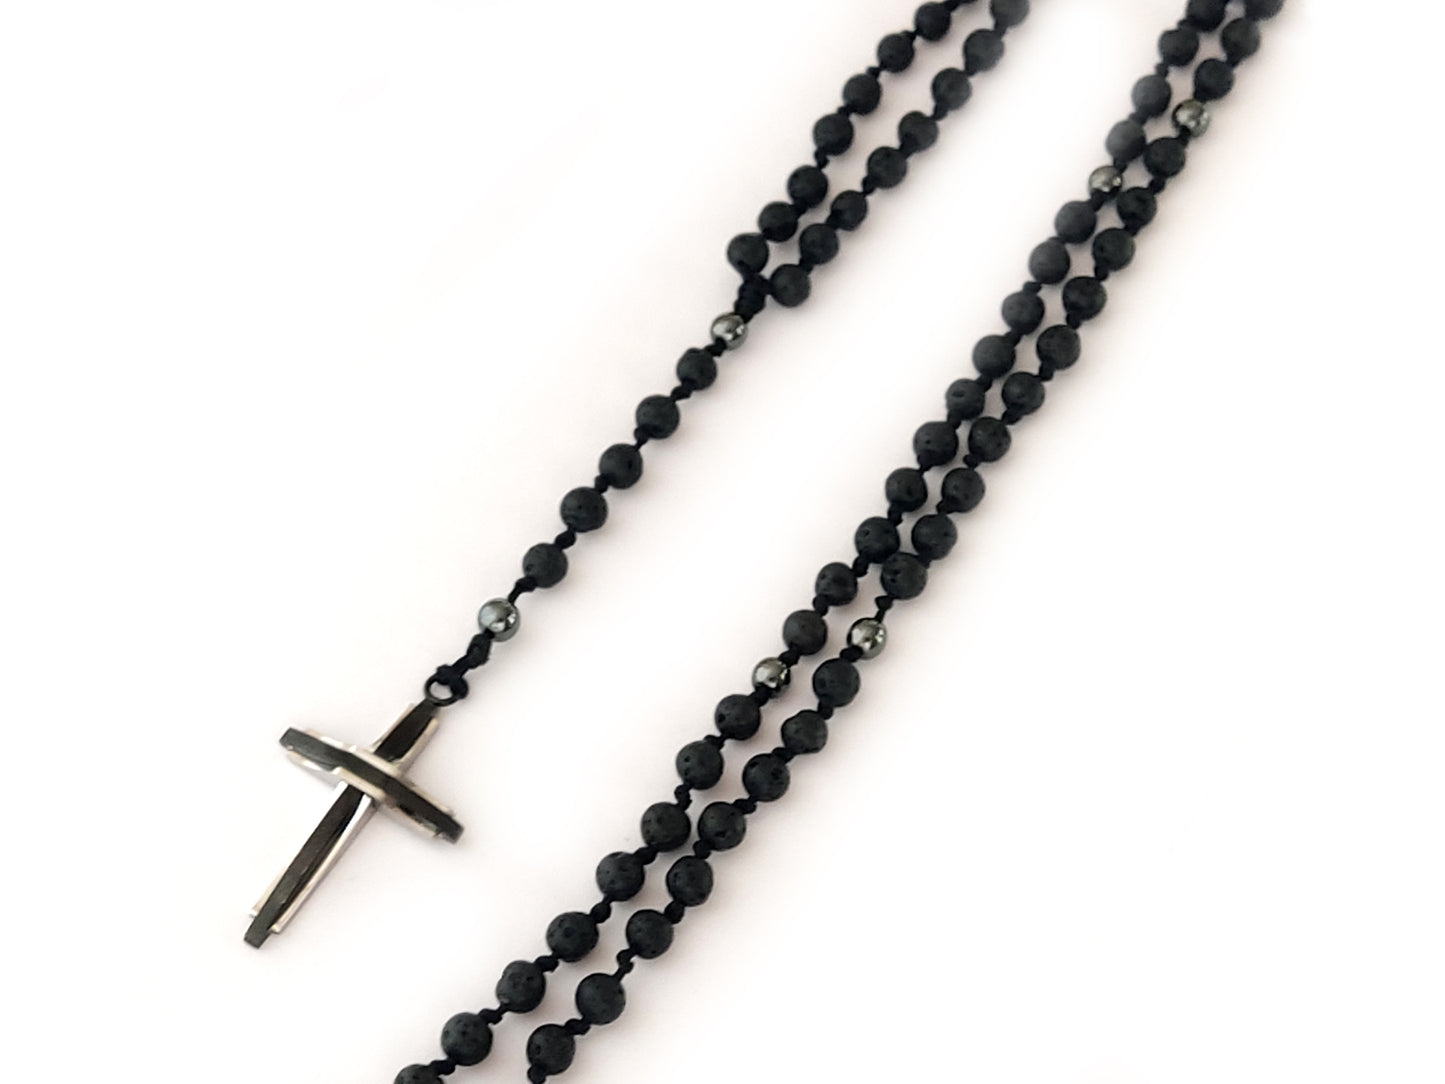 Handmade Rosary Necklace with Natural Black Lava and Hematite Stones | Stainless Steel Cross | Adjustable Length | Made in Greece